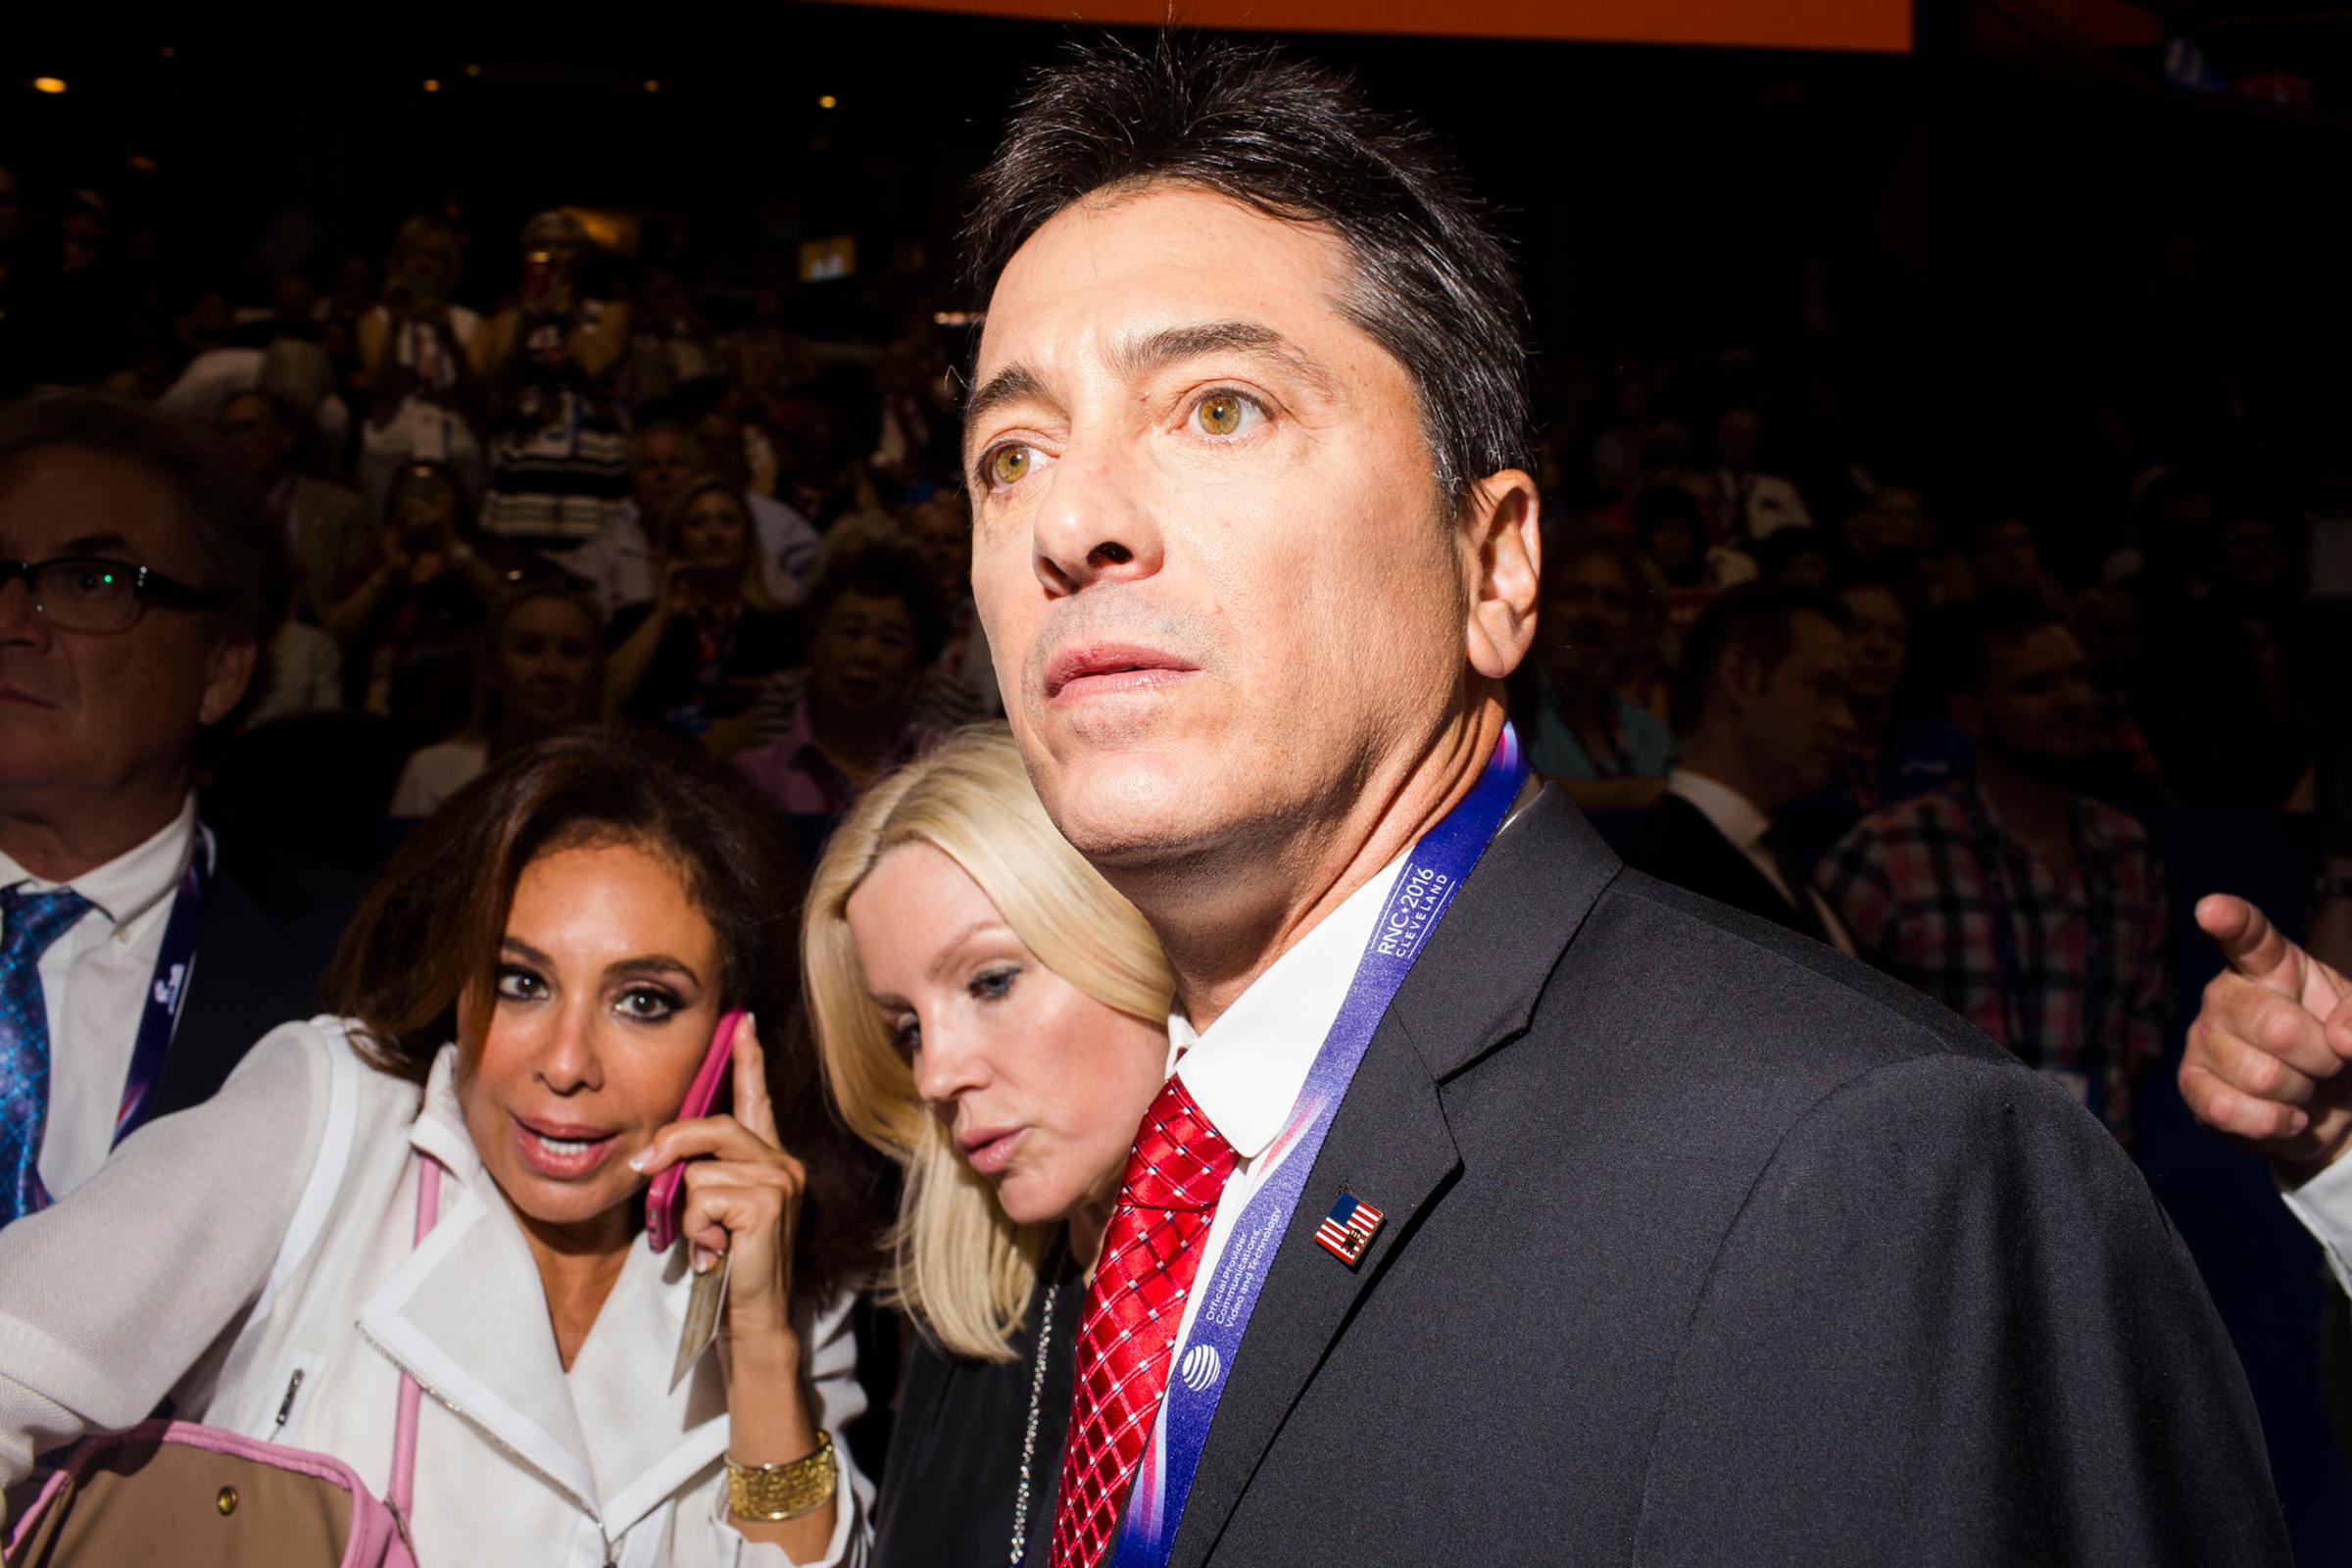 CLEVELAND - JULY 18: Scott Baio after his speech. Scenes from the floor of the 2016 Republican National Convention on Monday, July 18, 2016, in Cleveland, Ohio. (Photo by Landon Nordeman)